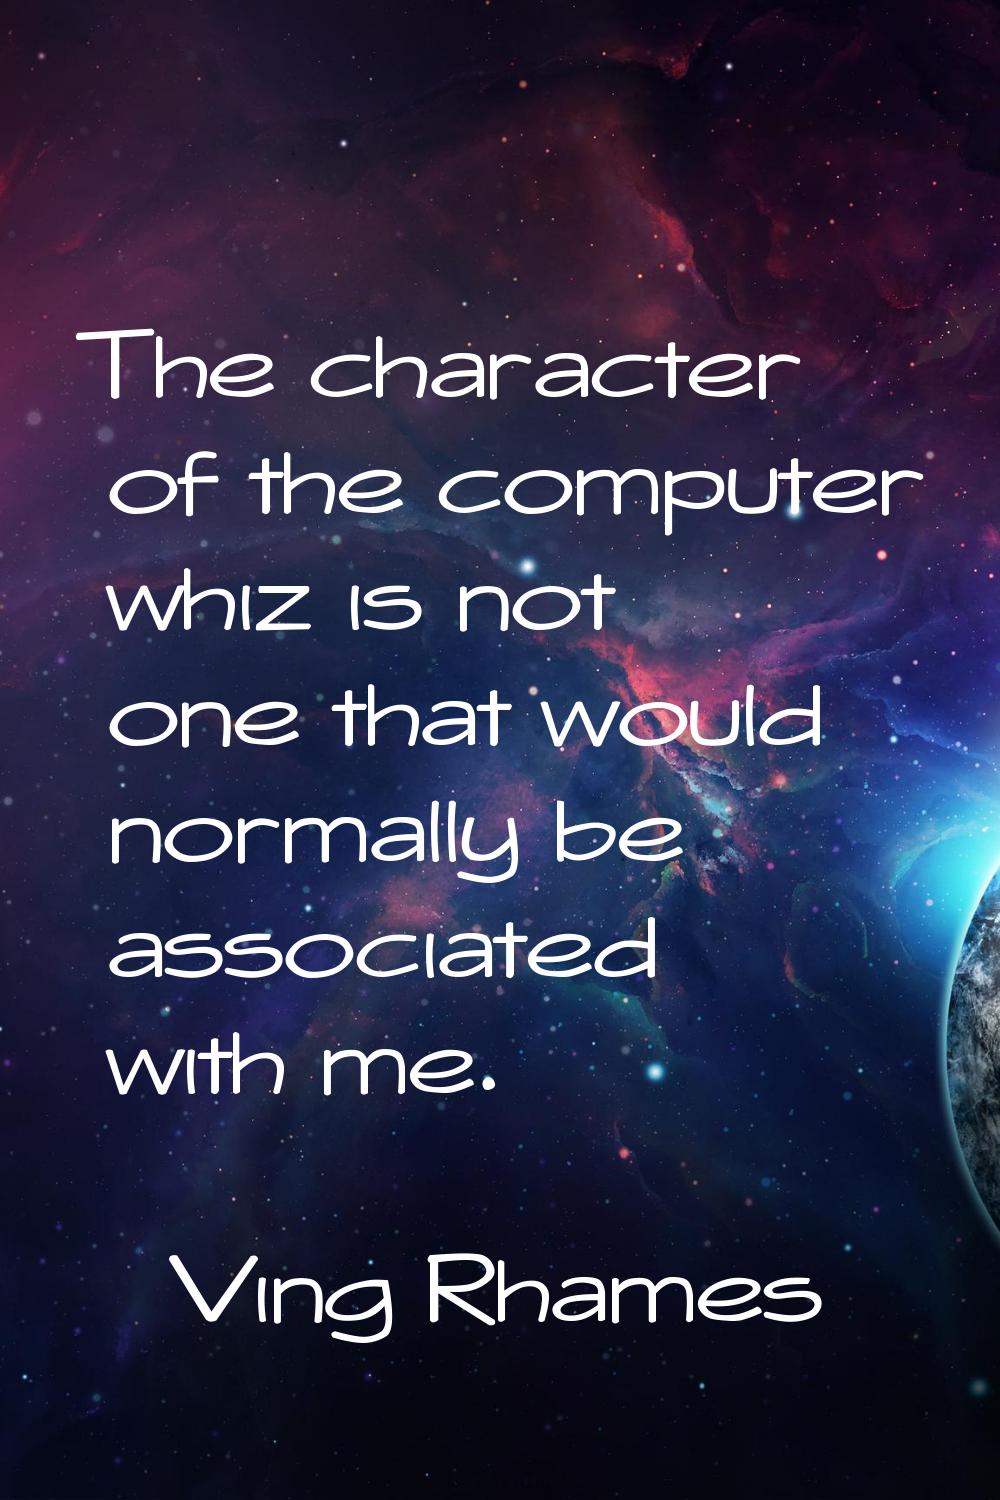 The character of the computer whiz is not one that would normally be associated with me.